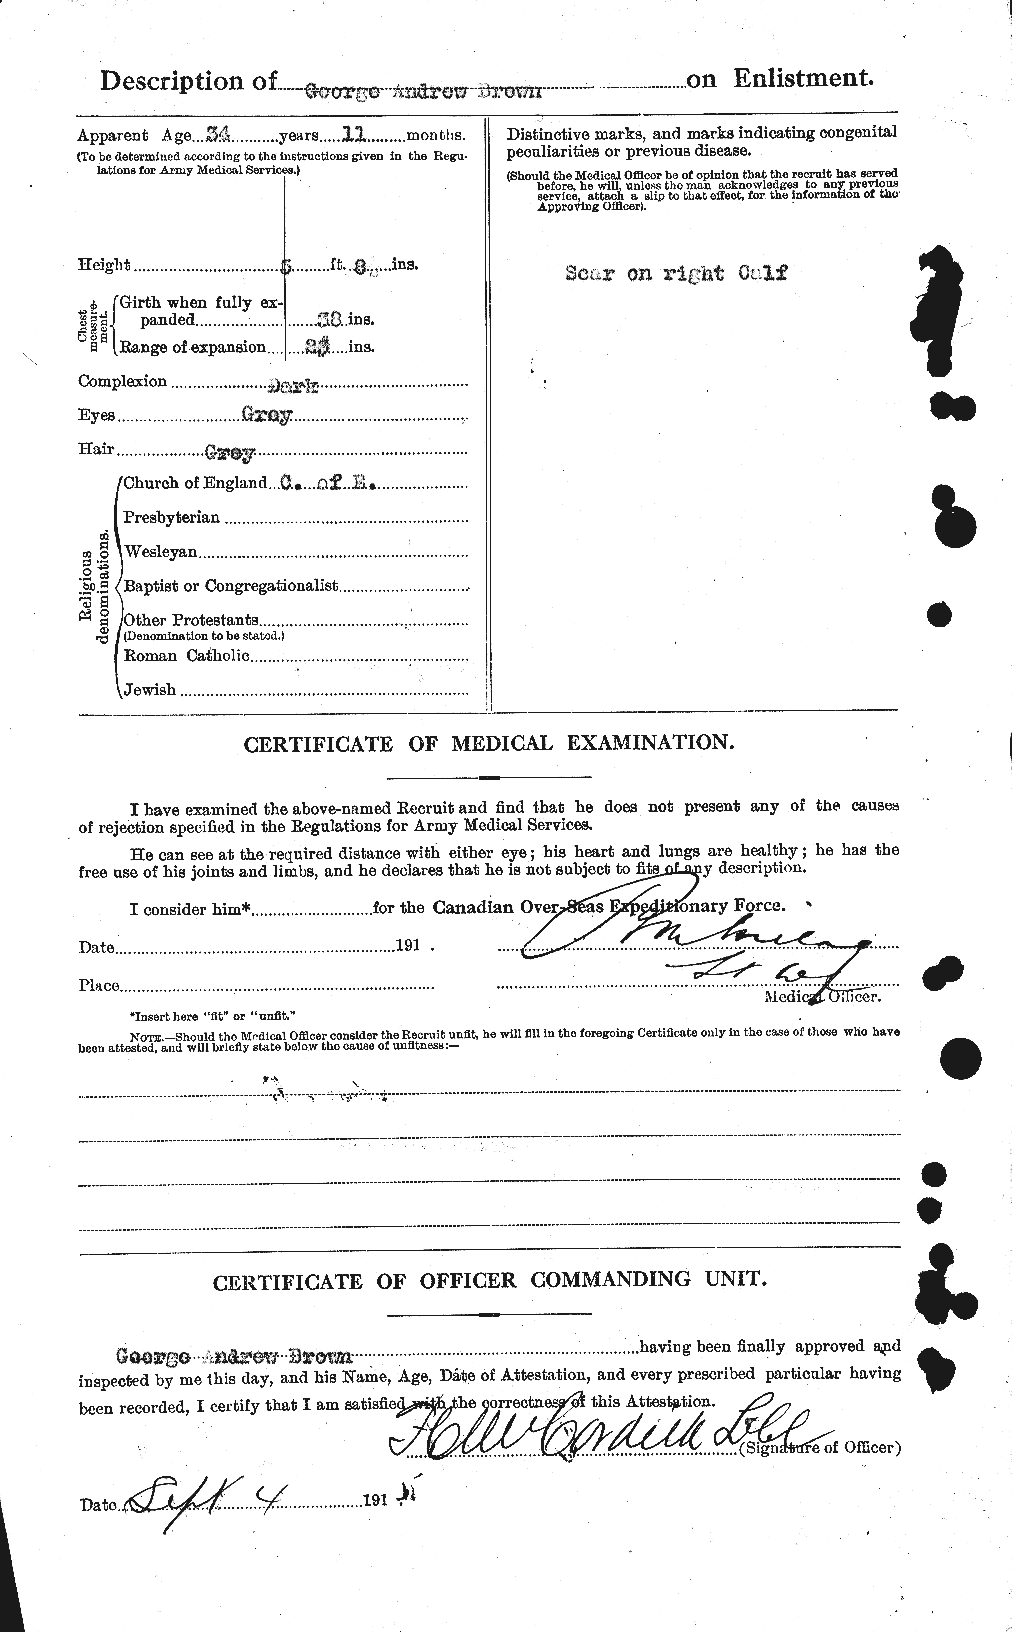 Personnel Records of the First World War - CEF 267883b